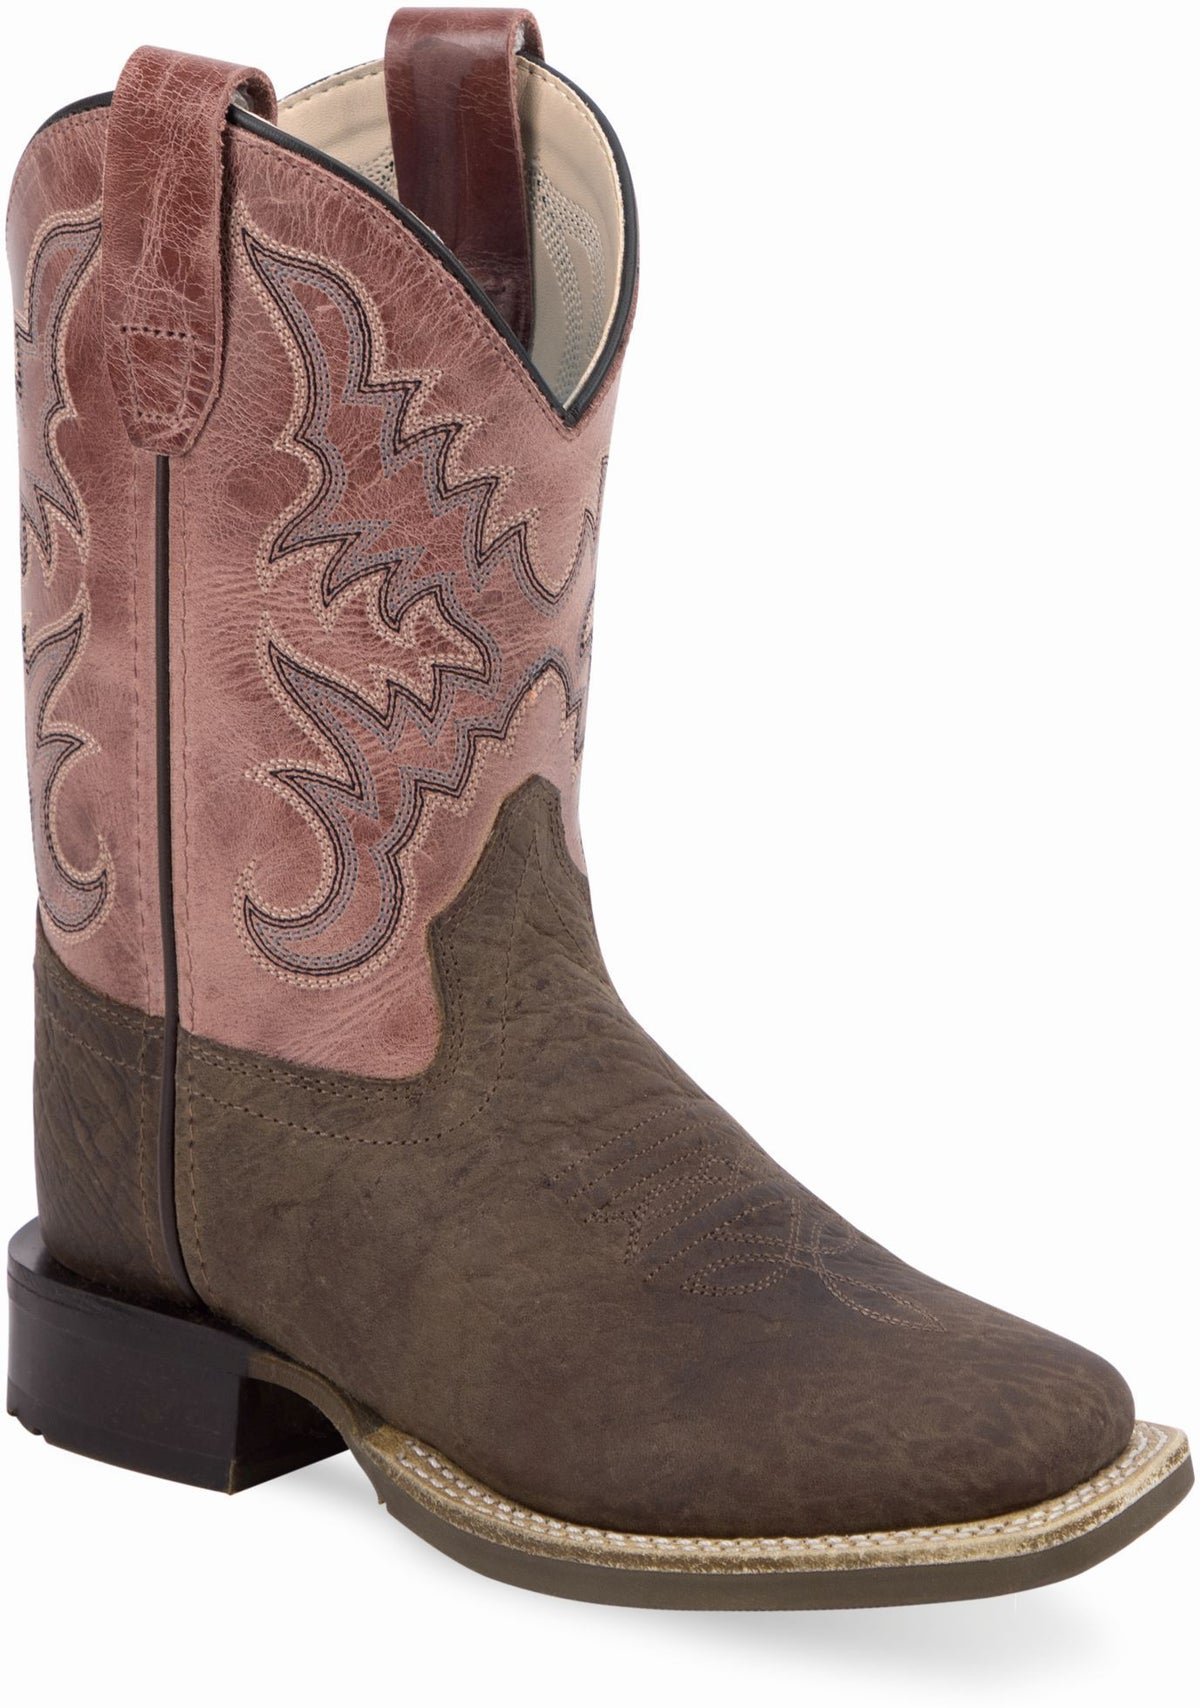 Old West Dark Brown Bull Hide Print Foot Light Pink Cactus Shaft Youth's Broad Square Toe Boots